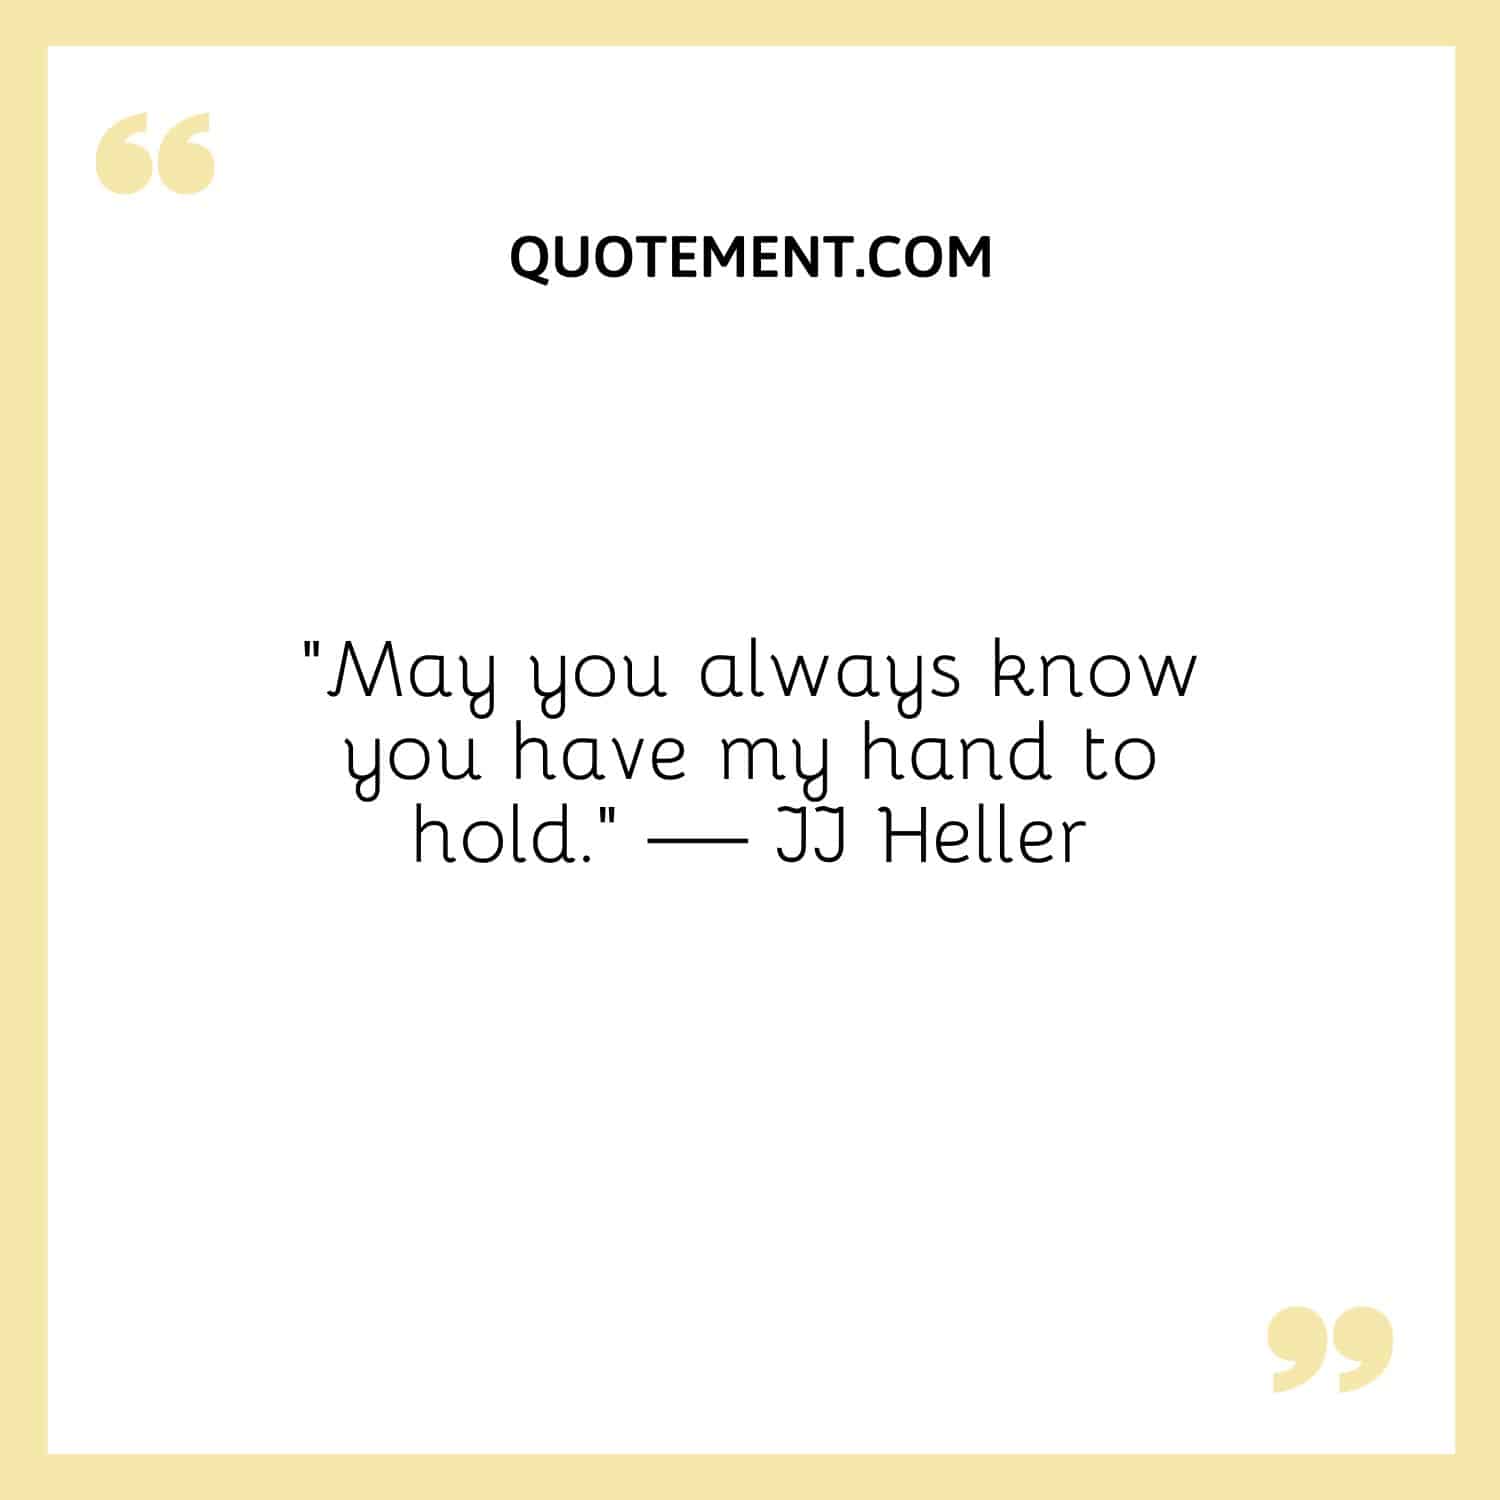 May you always know you have my hand to hold.